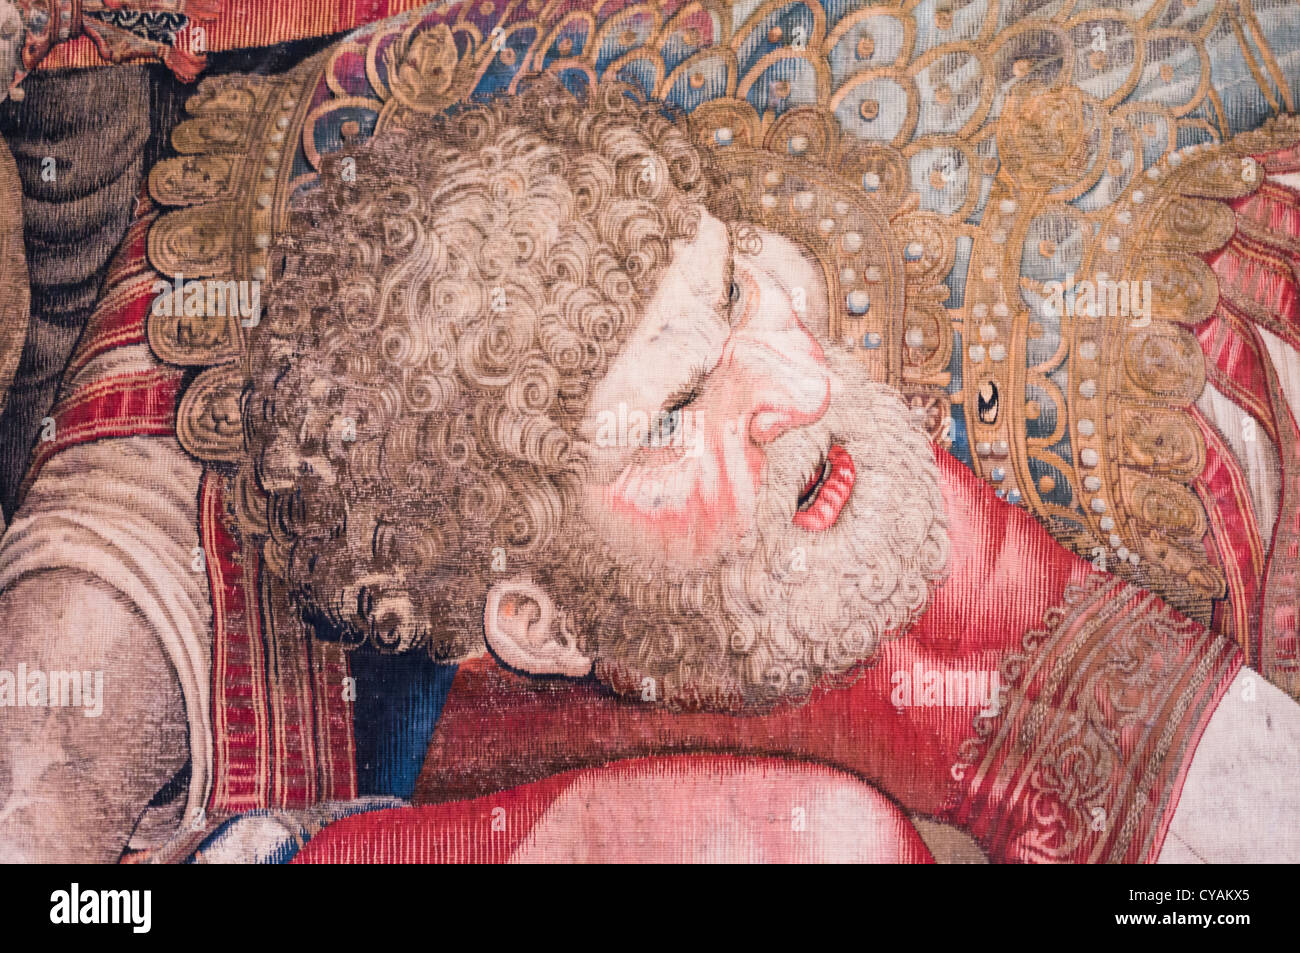 DETAIL, GALLERY OF TAPESTRIES, VATICAN MUSEUM, ROME Stock Photo